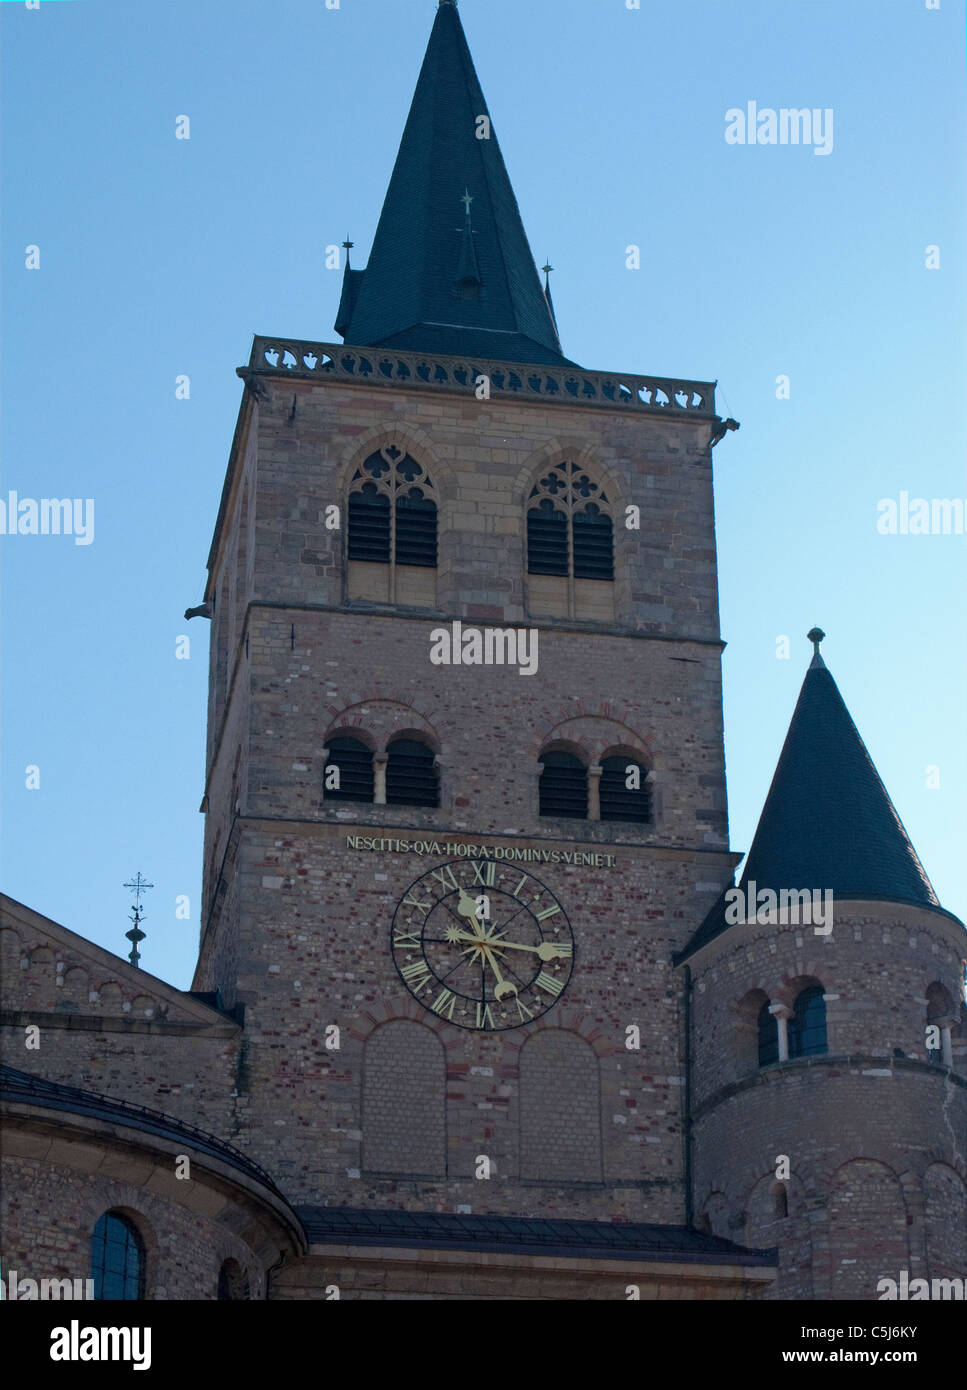 Detail, Turm mit Domuhr, Hohe Domkirche St. Peter zu Trier, Tower with clock, Cathedral of Trier, Saint Peter, dome Stock Photo